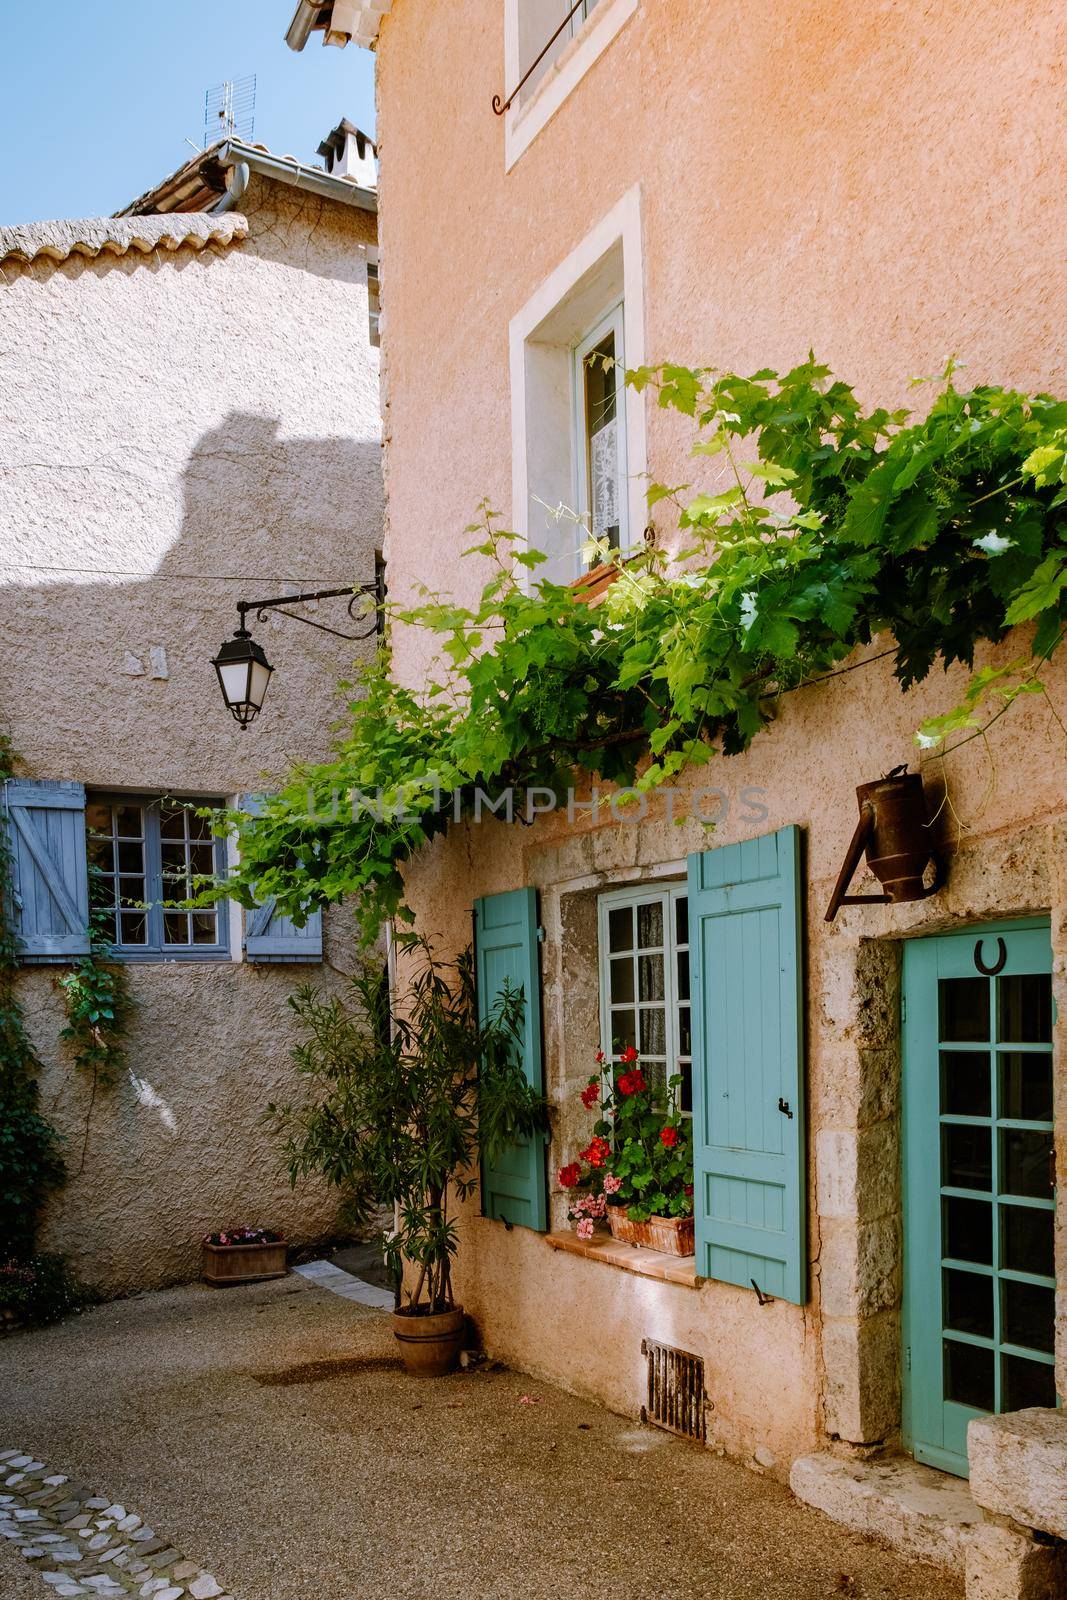 The Village of Moustiers-Sainte-Marie, Provence, France June 2020 by fokkebok